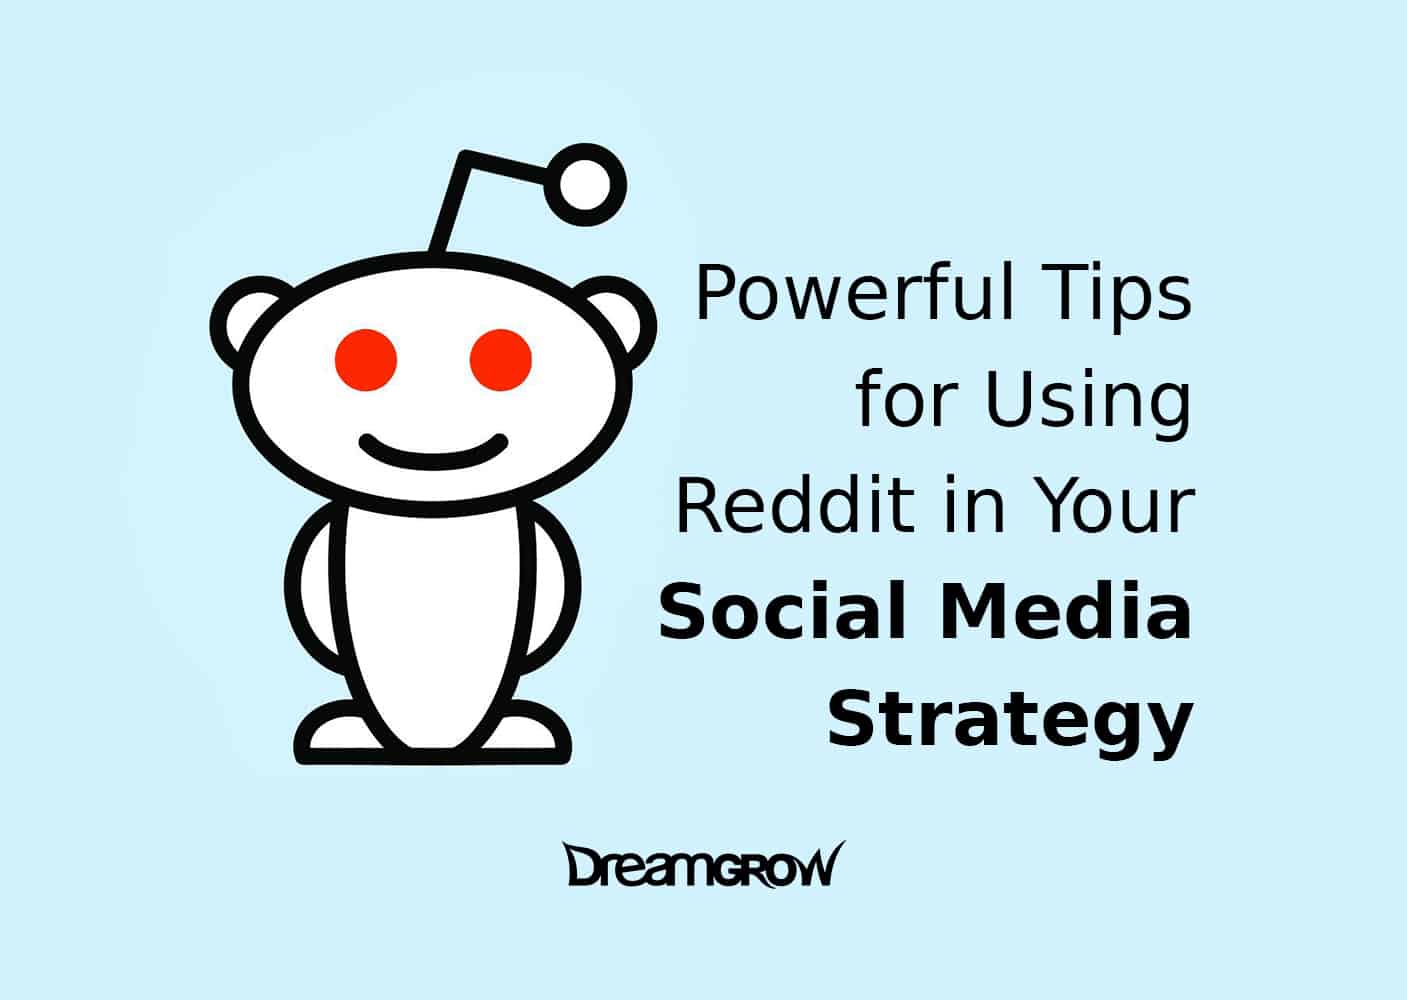 How to Use Reddit: 11 Steps (with Pictures) - wikiHow